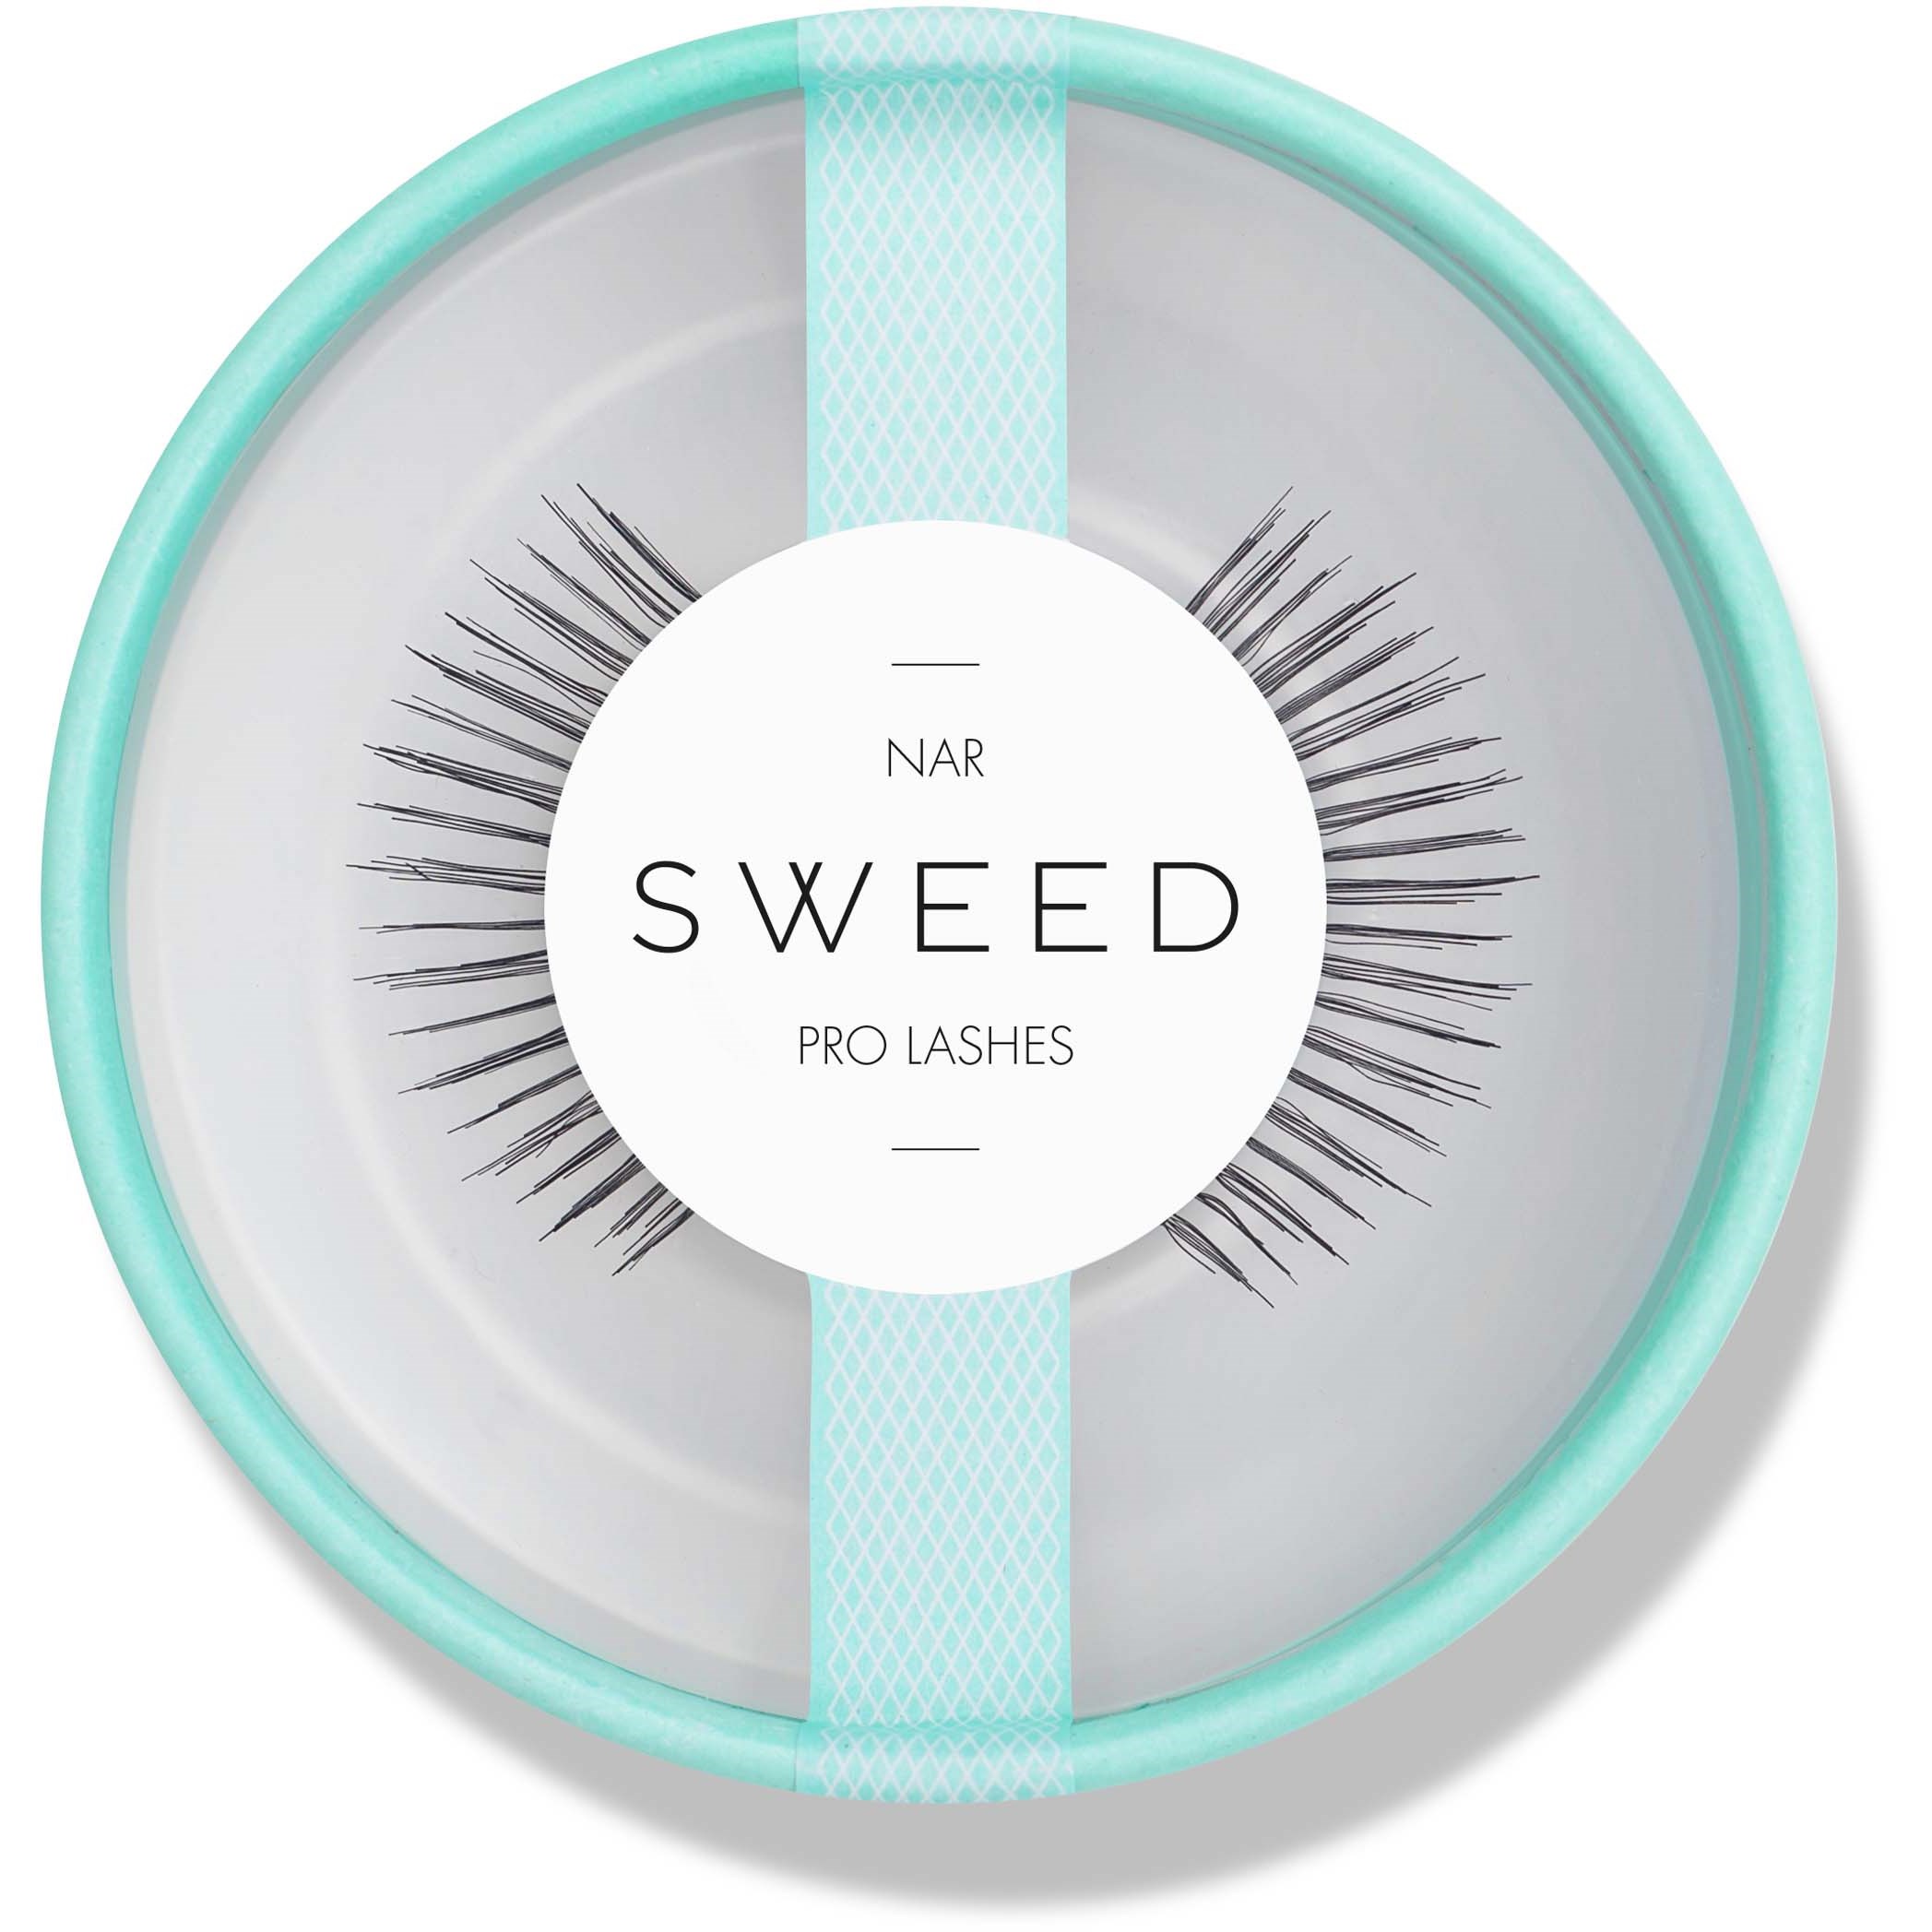 Sweed Pro Lashes Nar